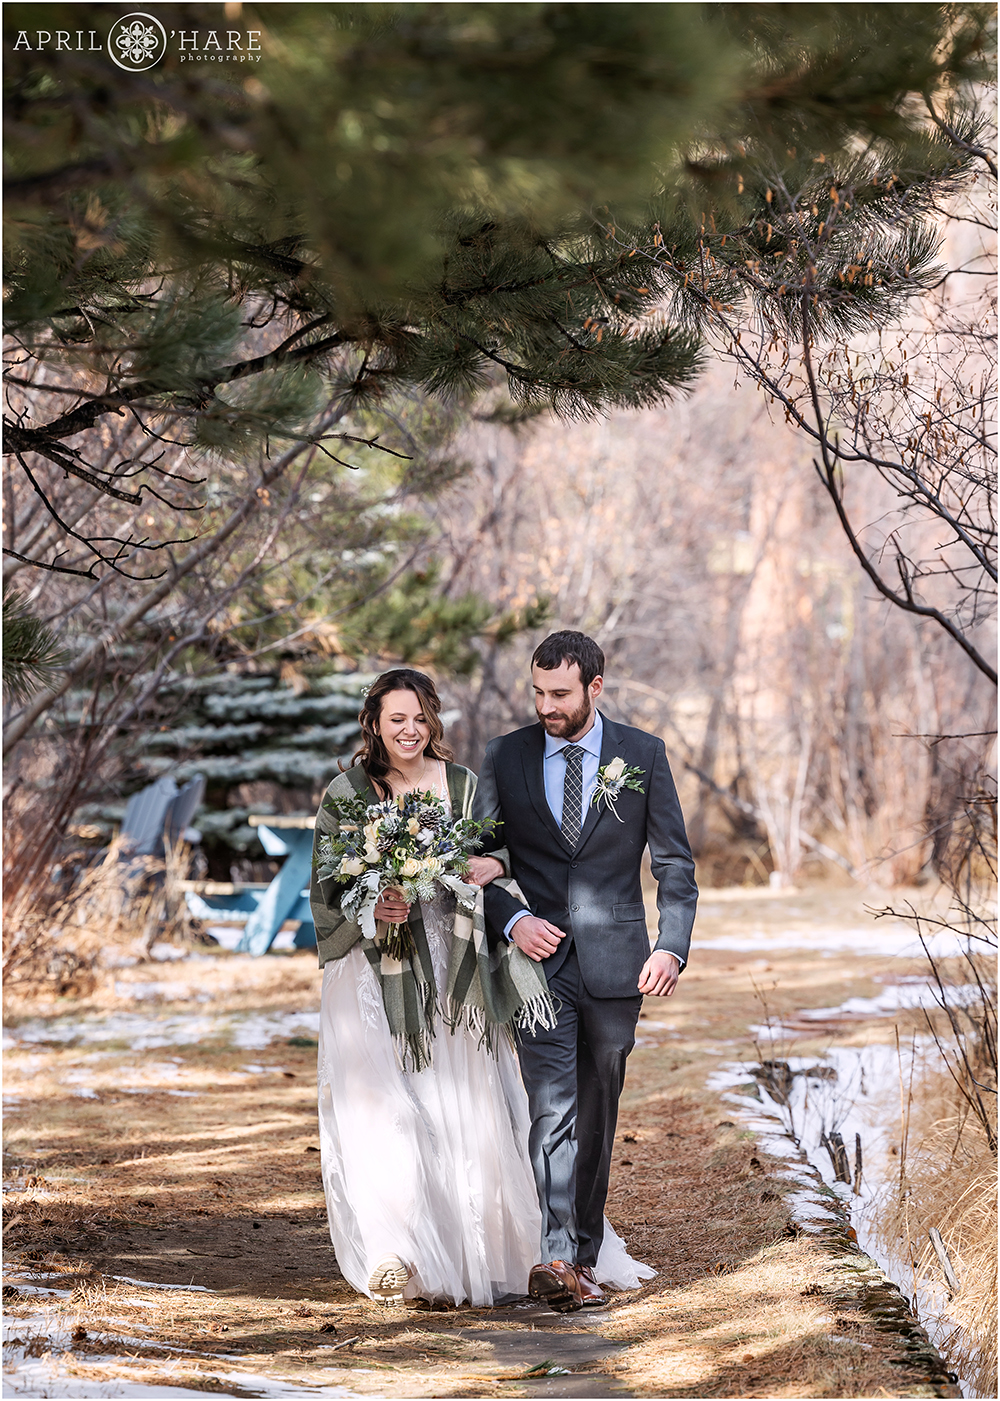 Bride and groom walk down a path to their outdoor winter wedding ceremony at Romantic Riversong Inn in Estes Park